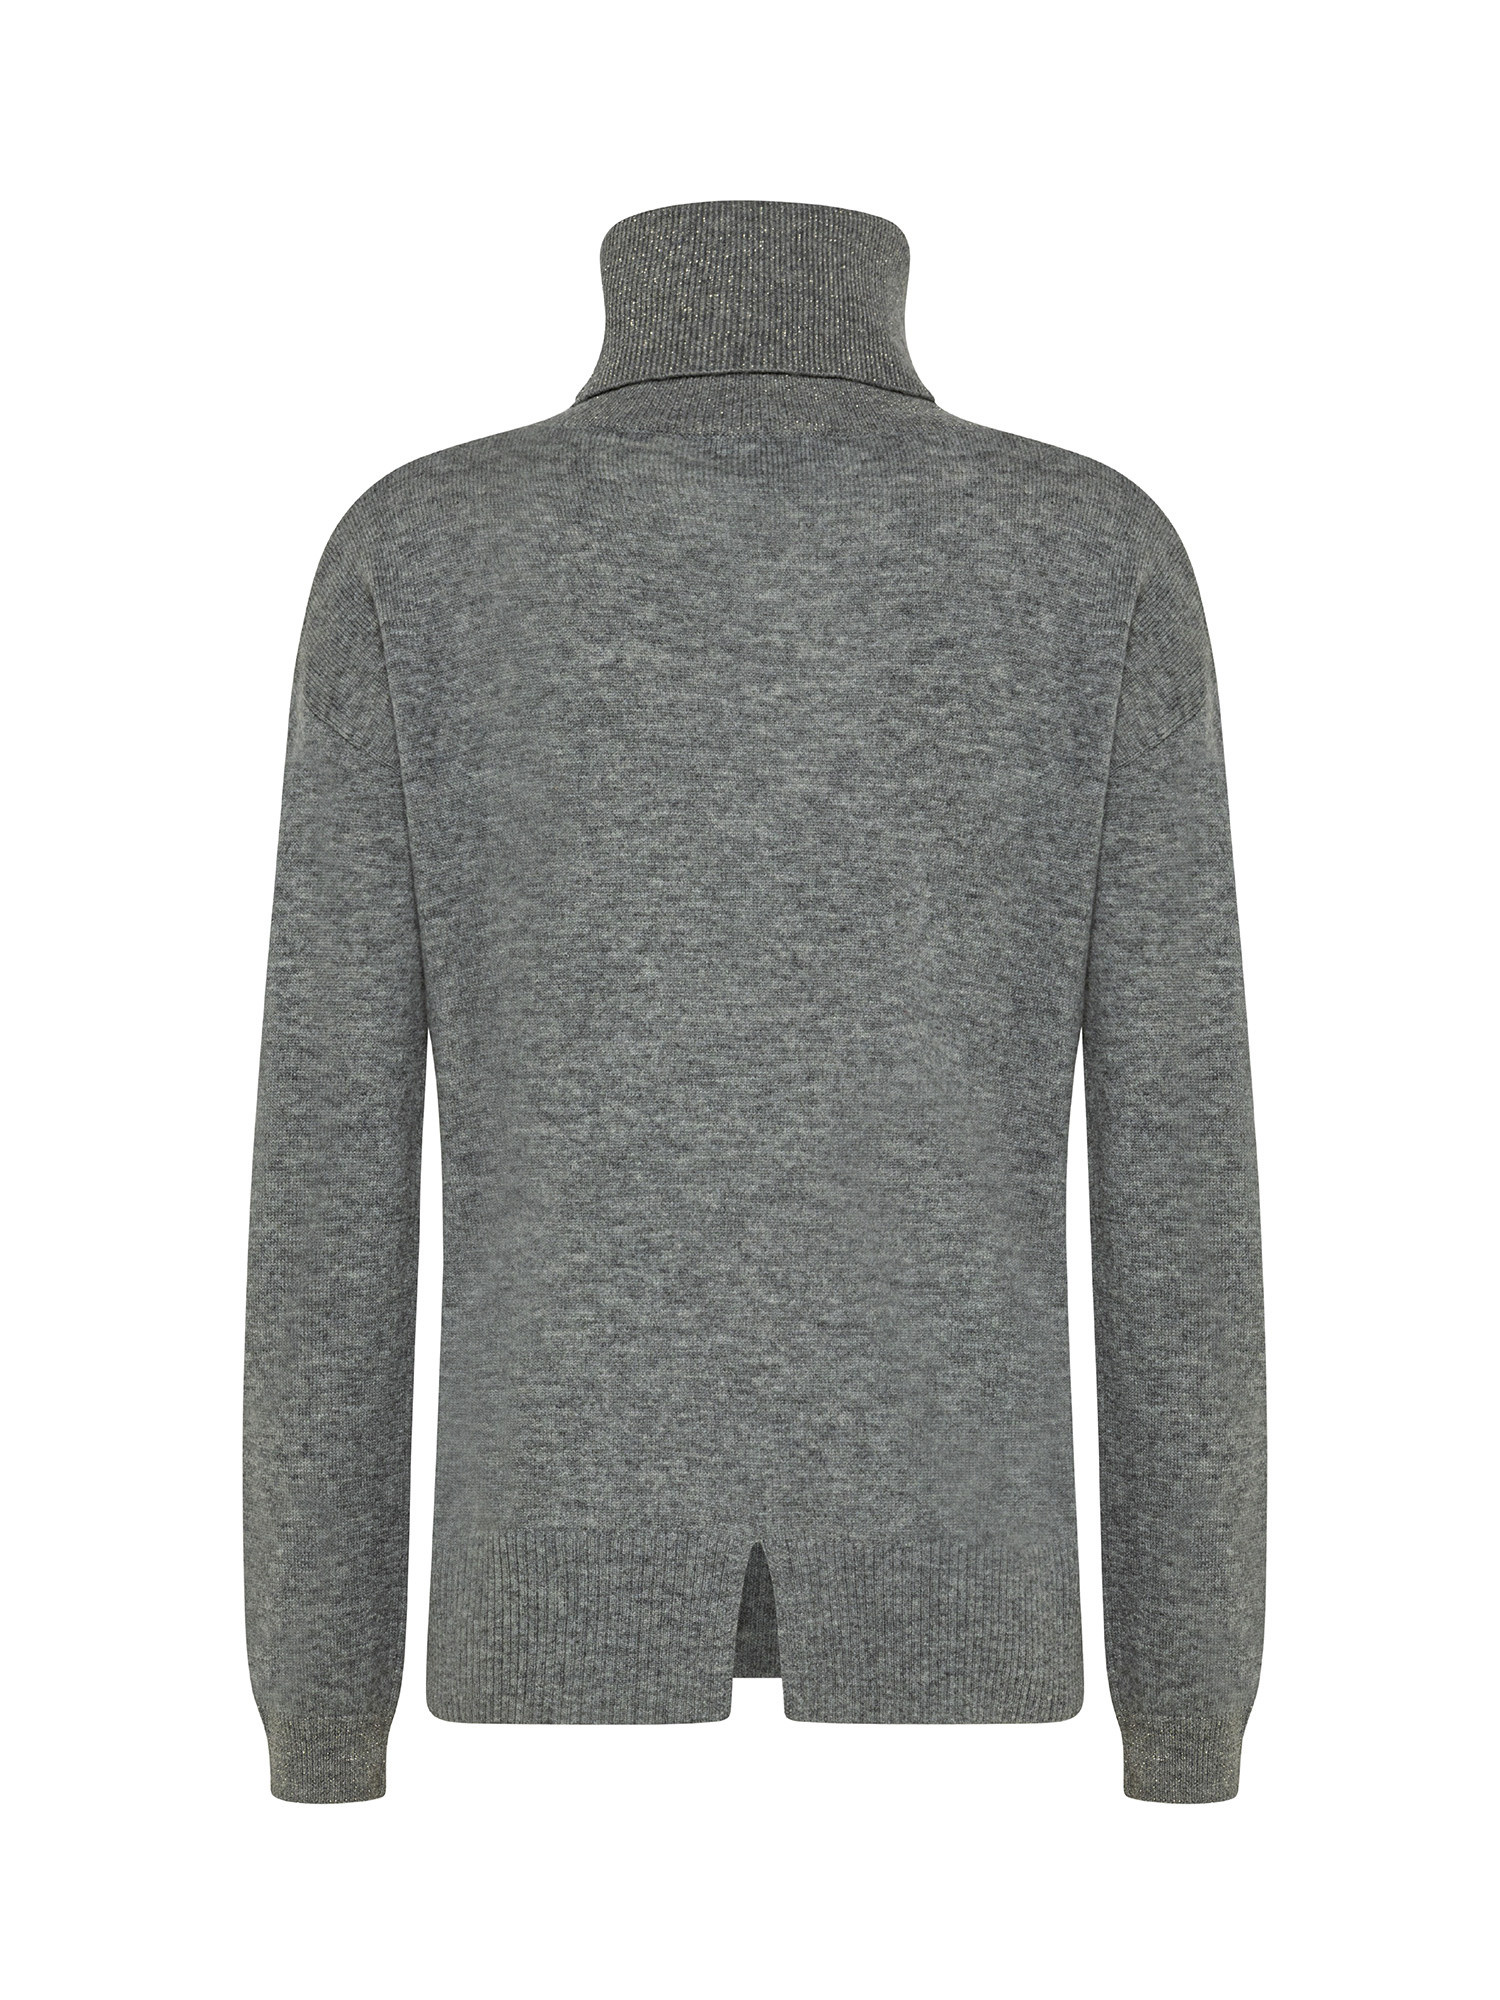 Koan - Wool and cashmere turtleneck pullover, Grey, large image number 1